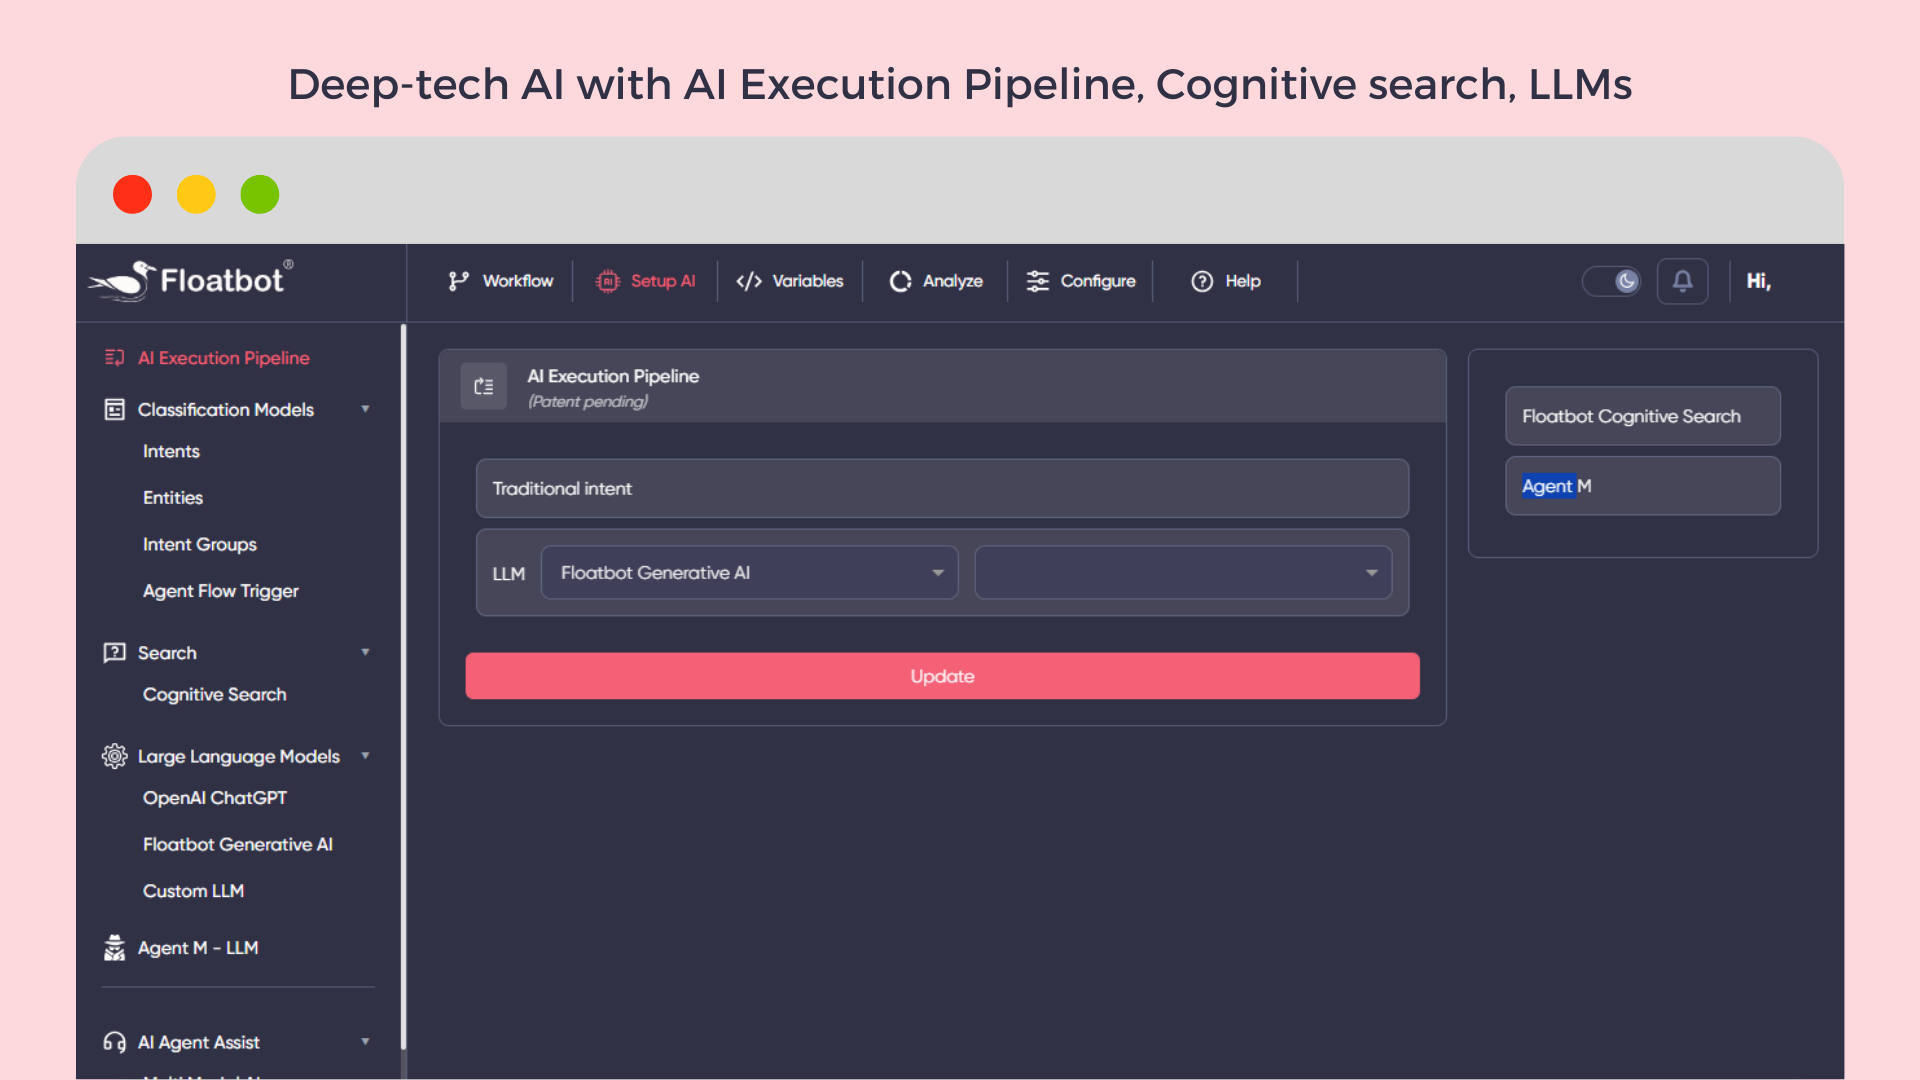 Deep-tech AI with AI Execution Pipeline, Cognitive search, LLMs